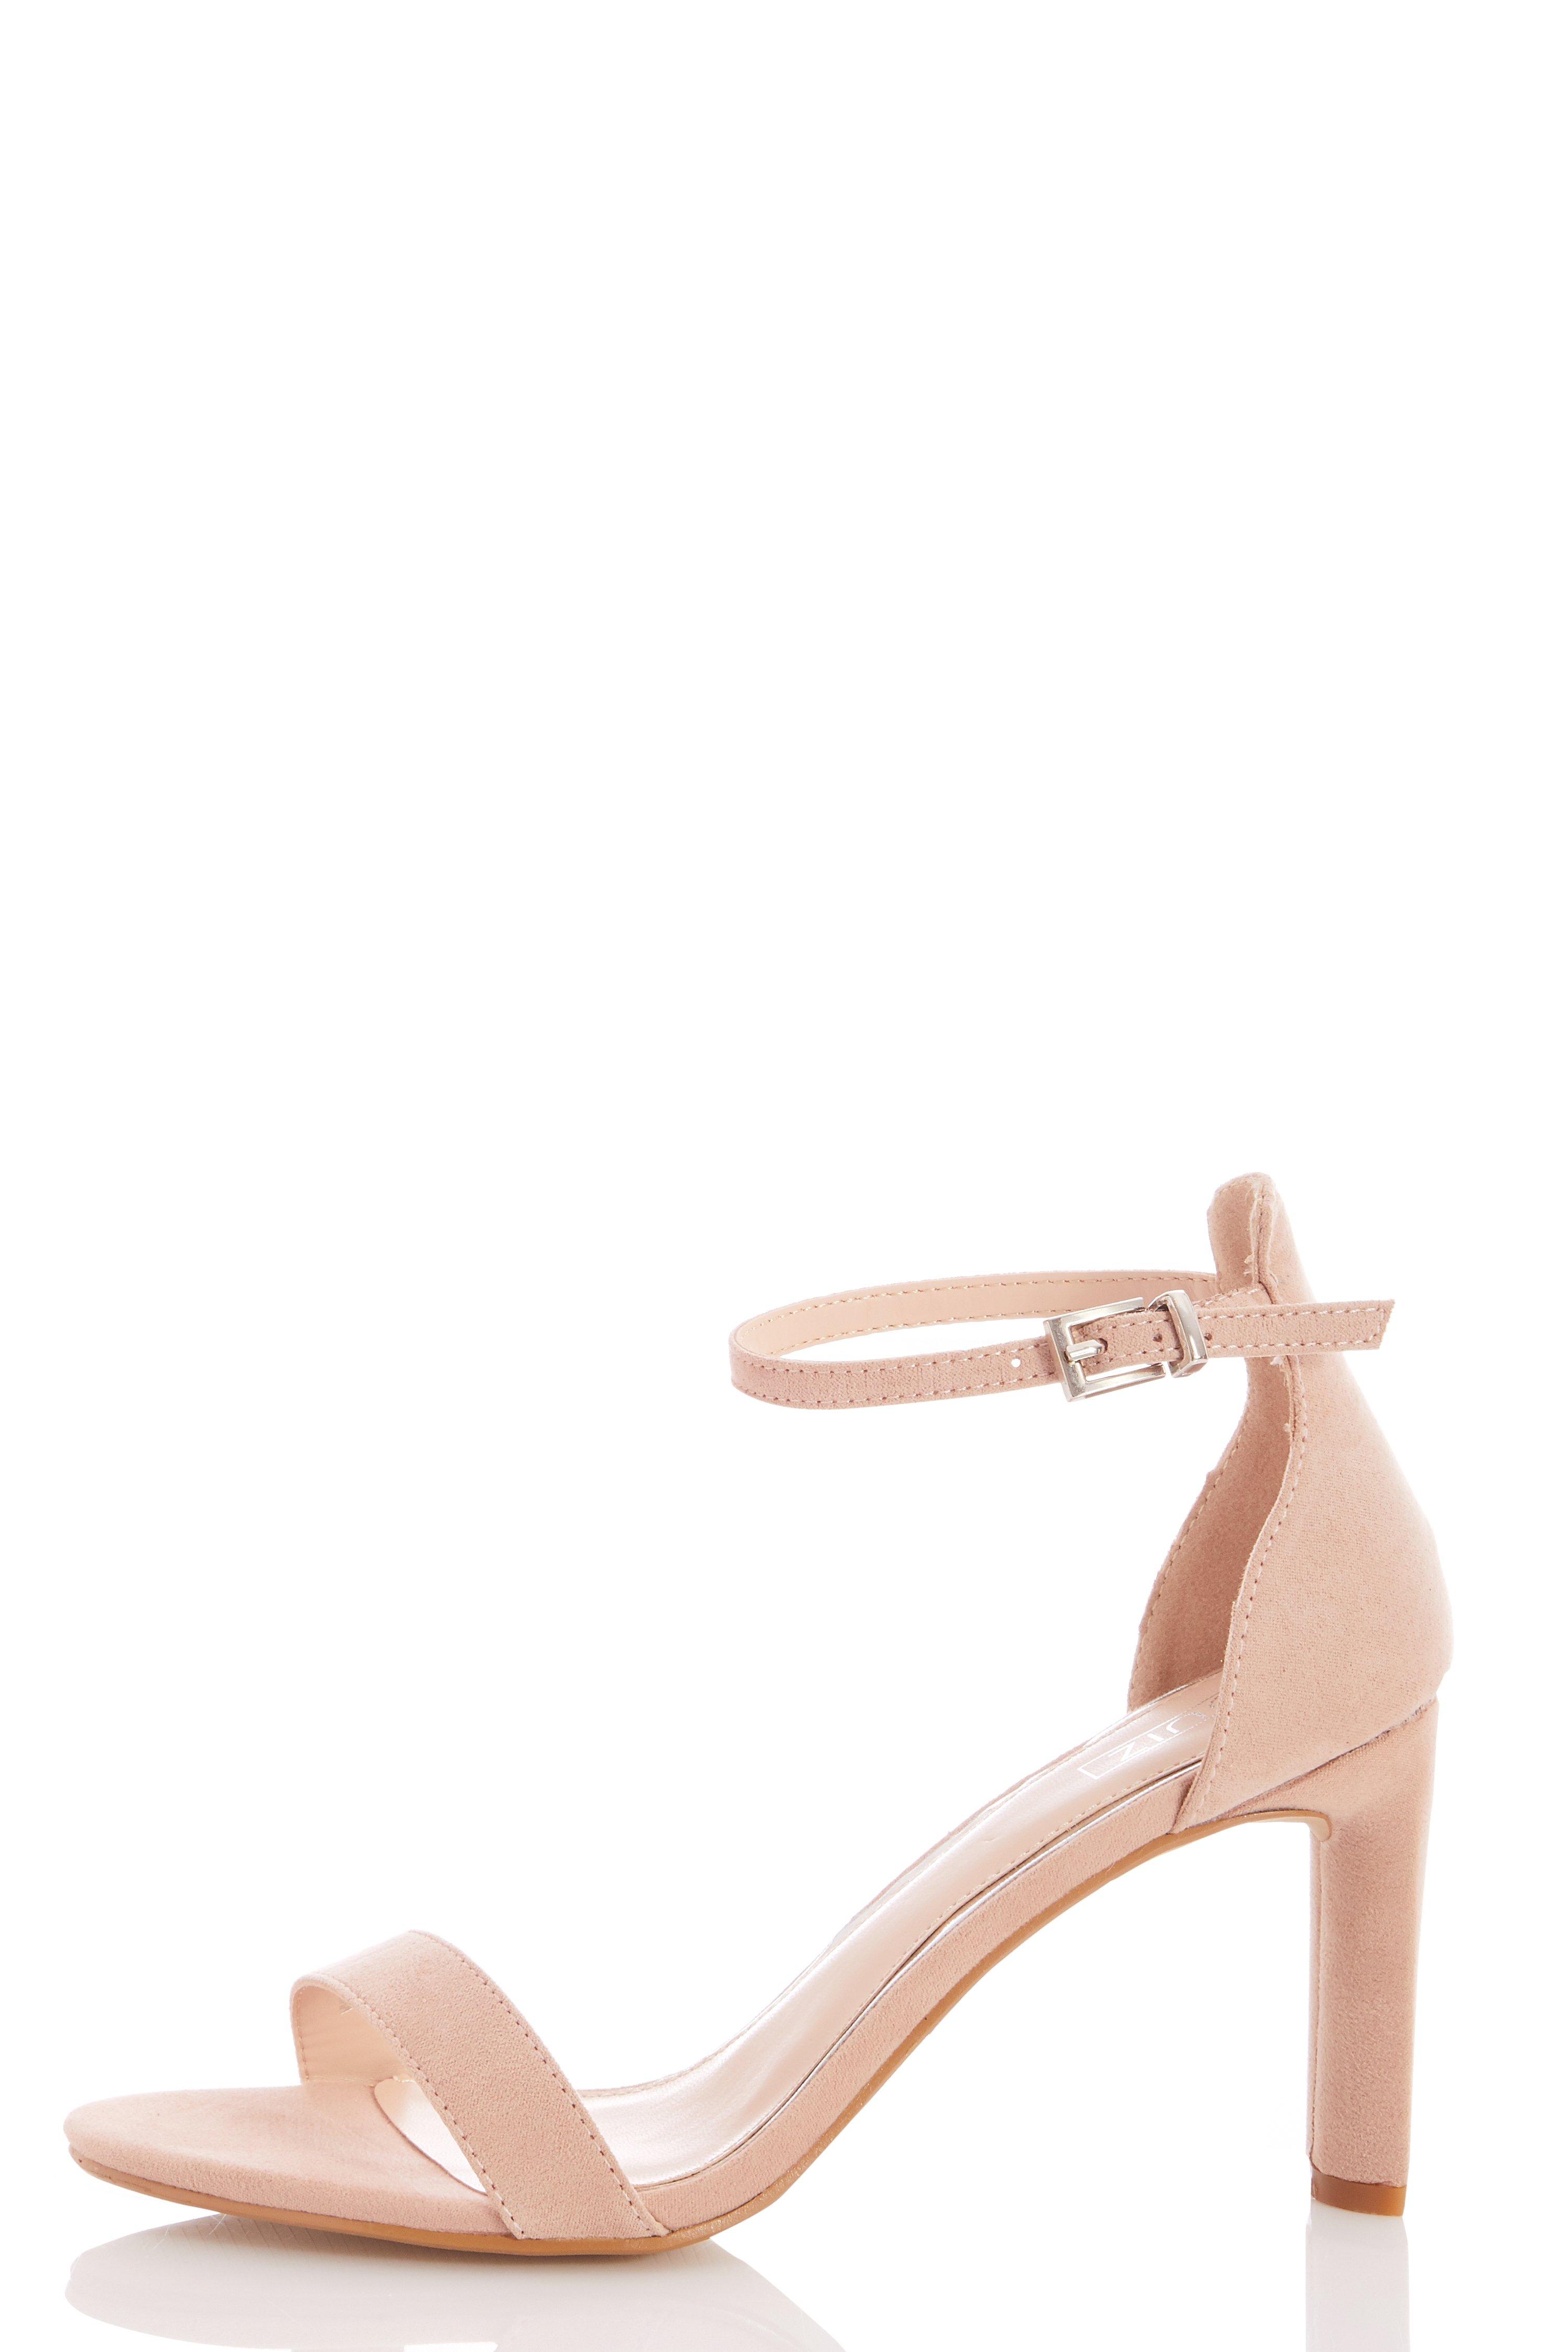 Pink Faux Suede Heeled Sandals - Quiz Clothing